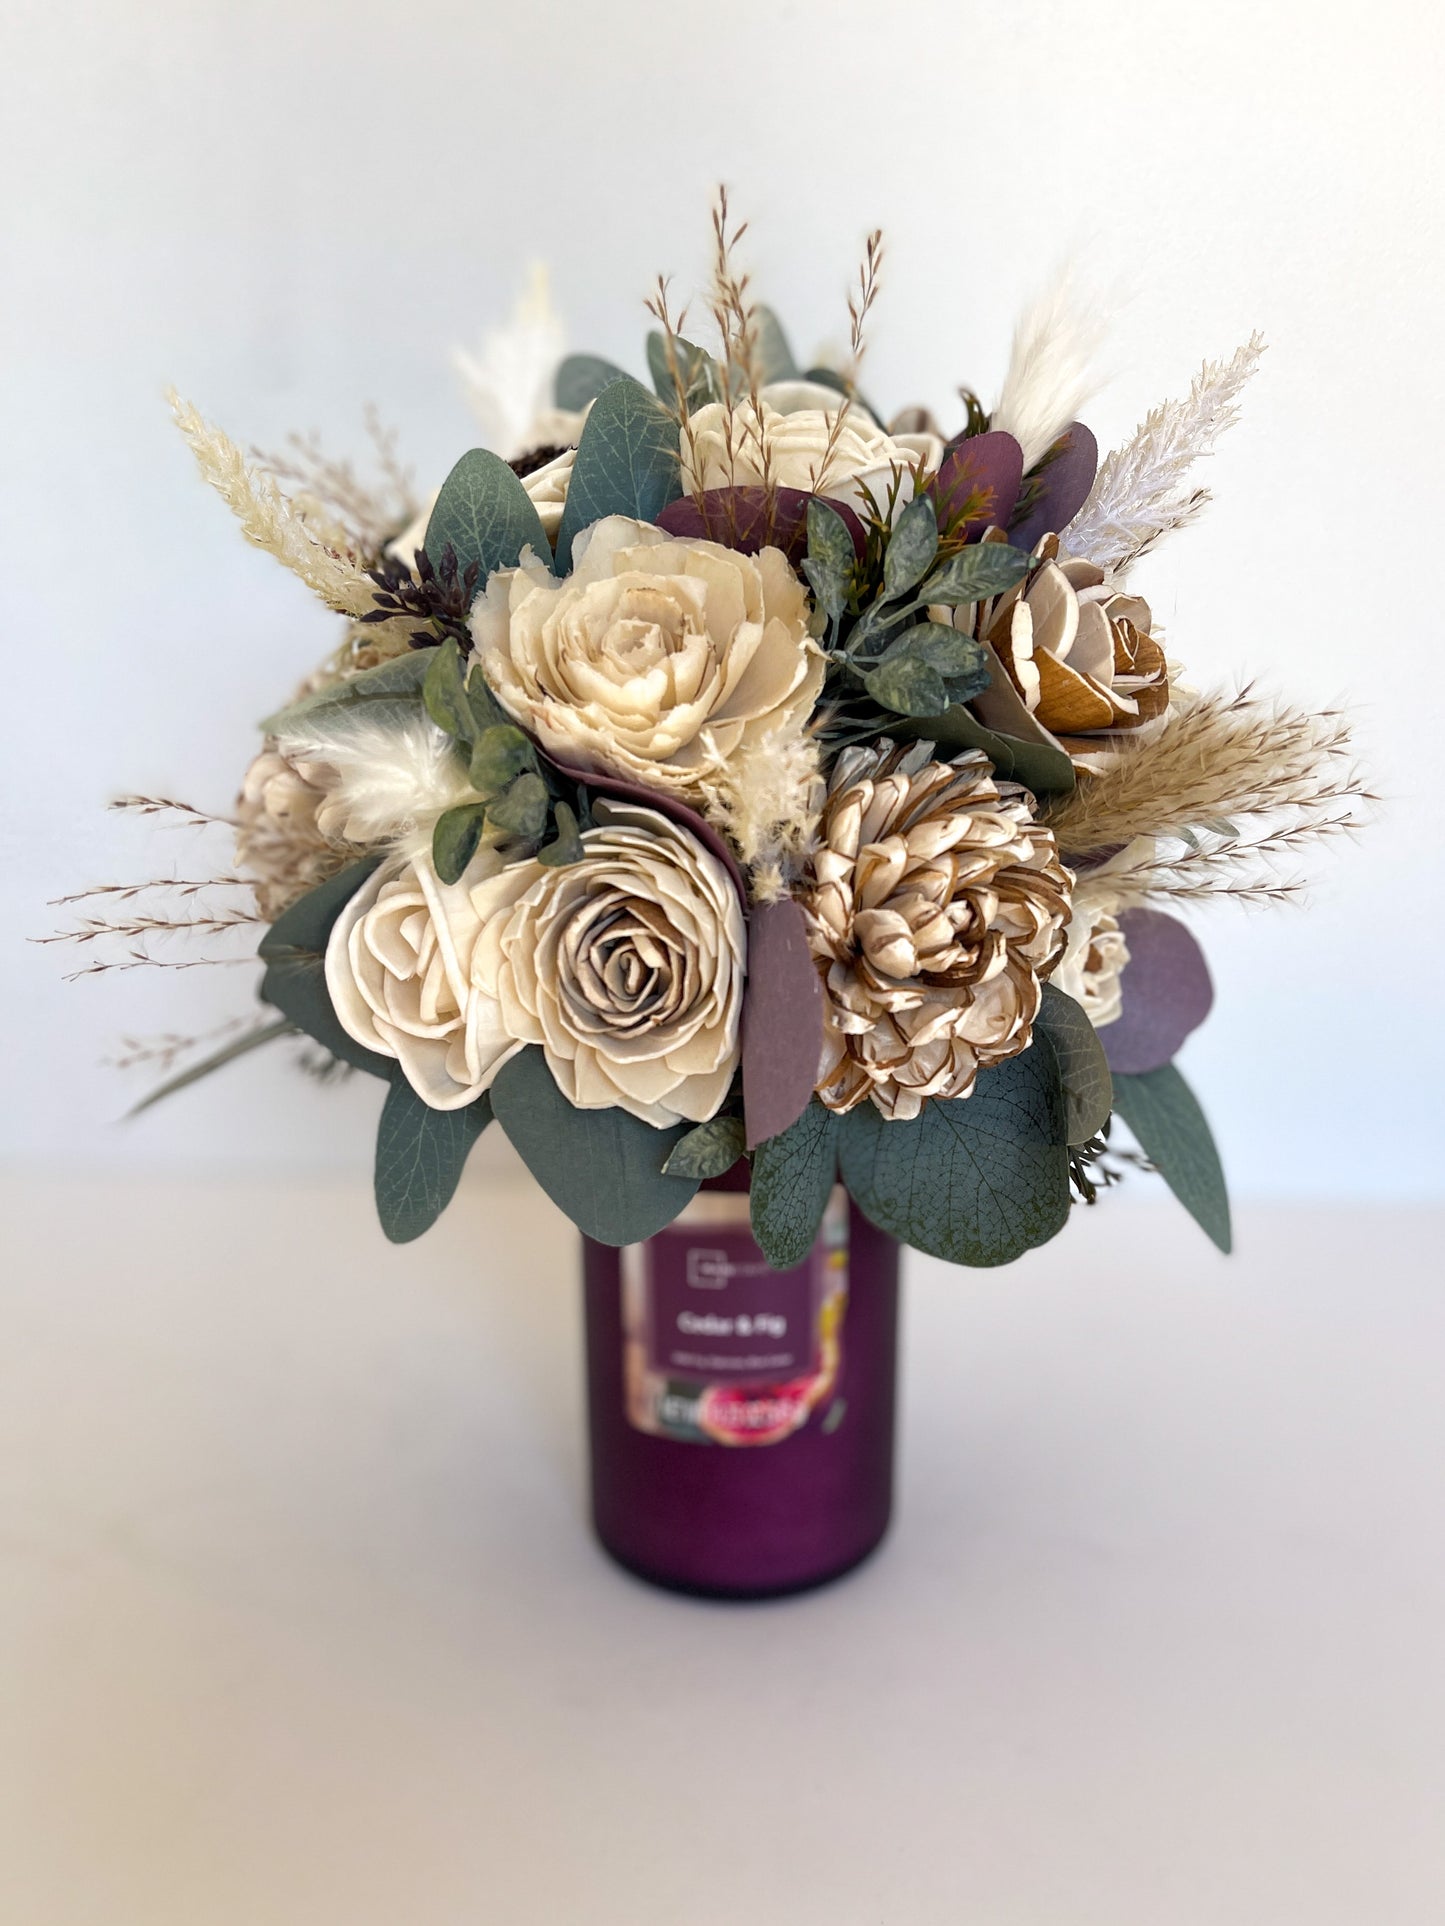 Candle Bouquet - Plum, Bark and Ivory